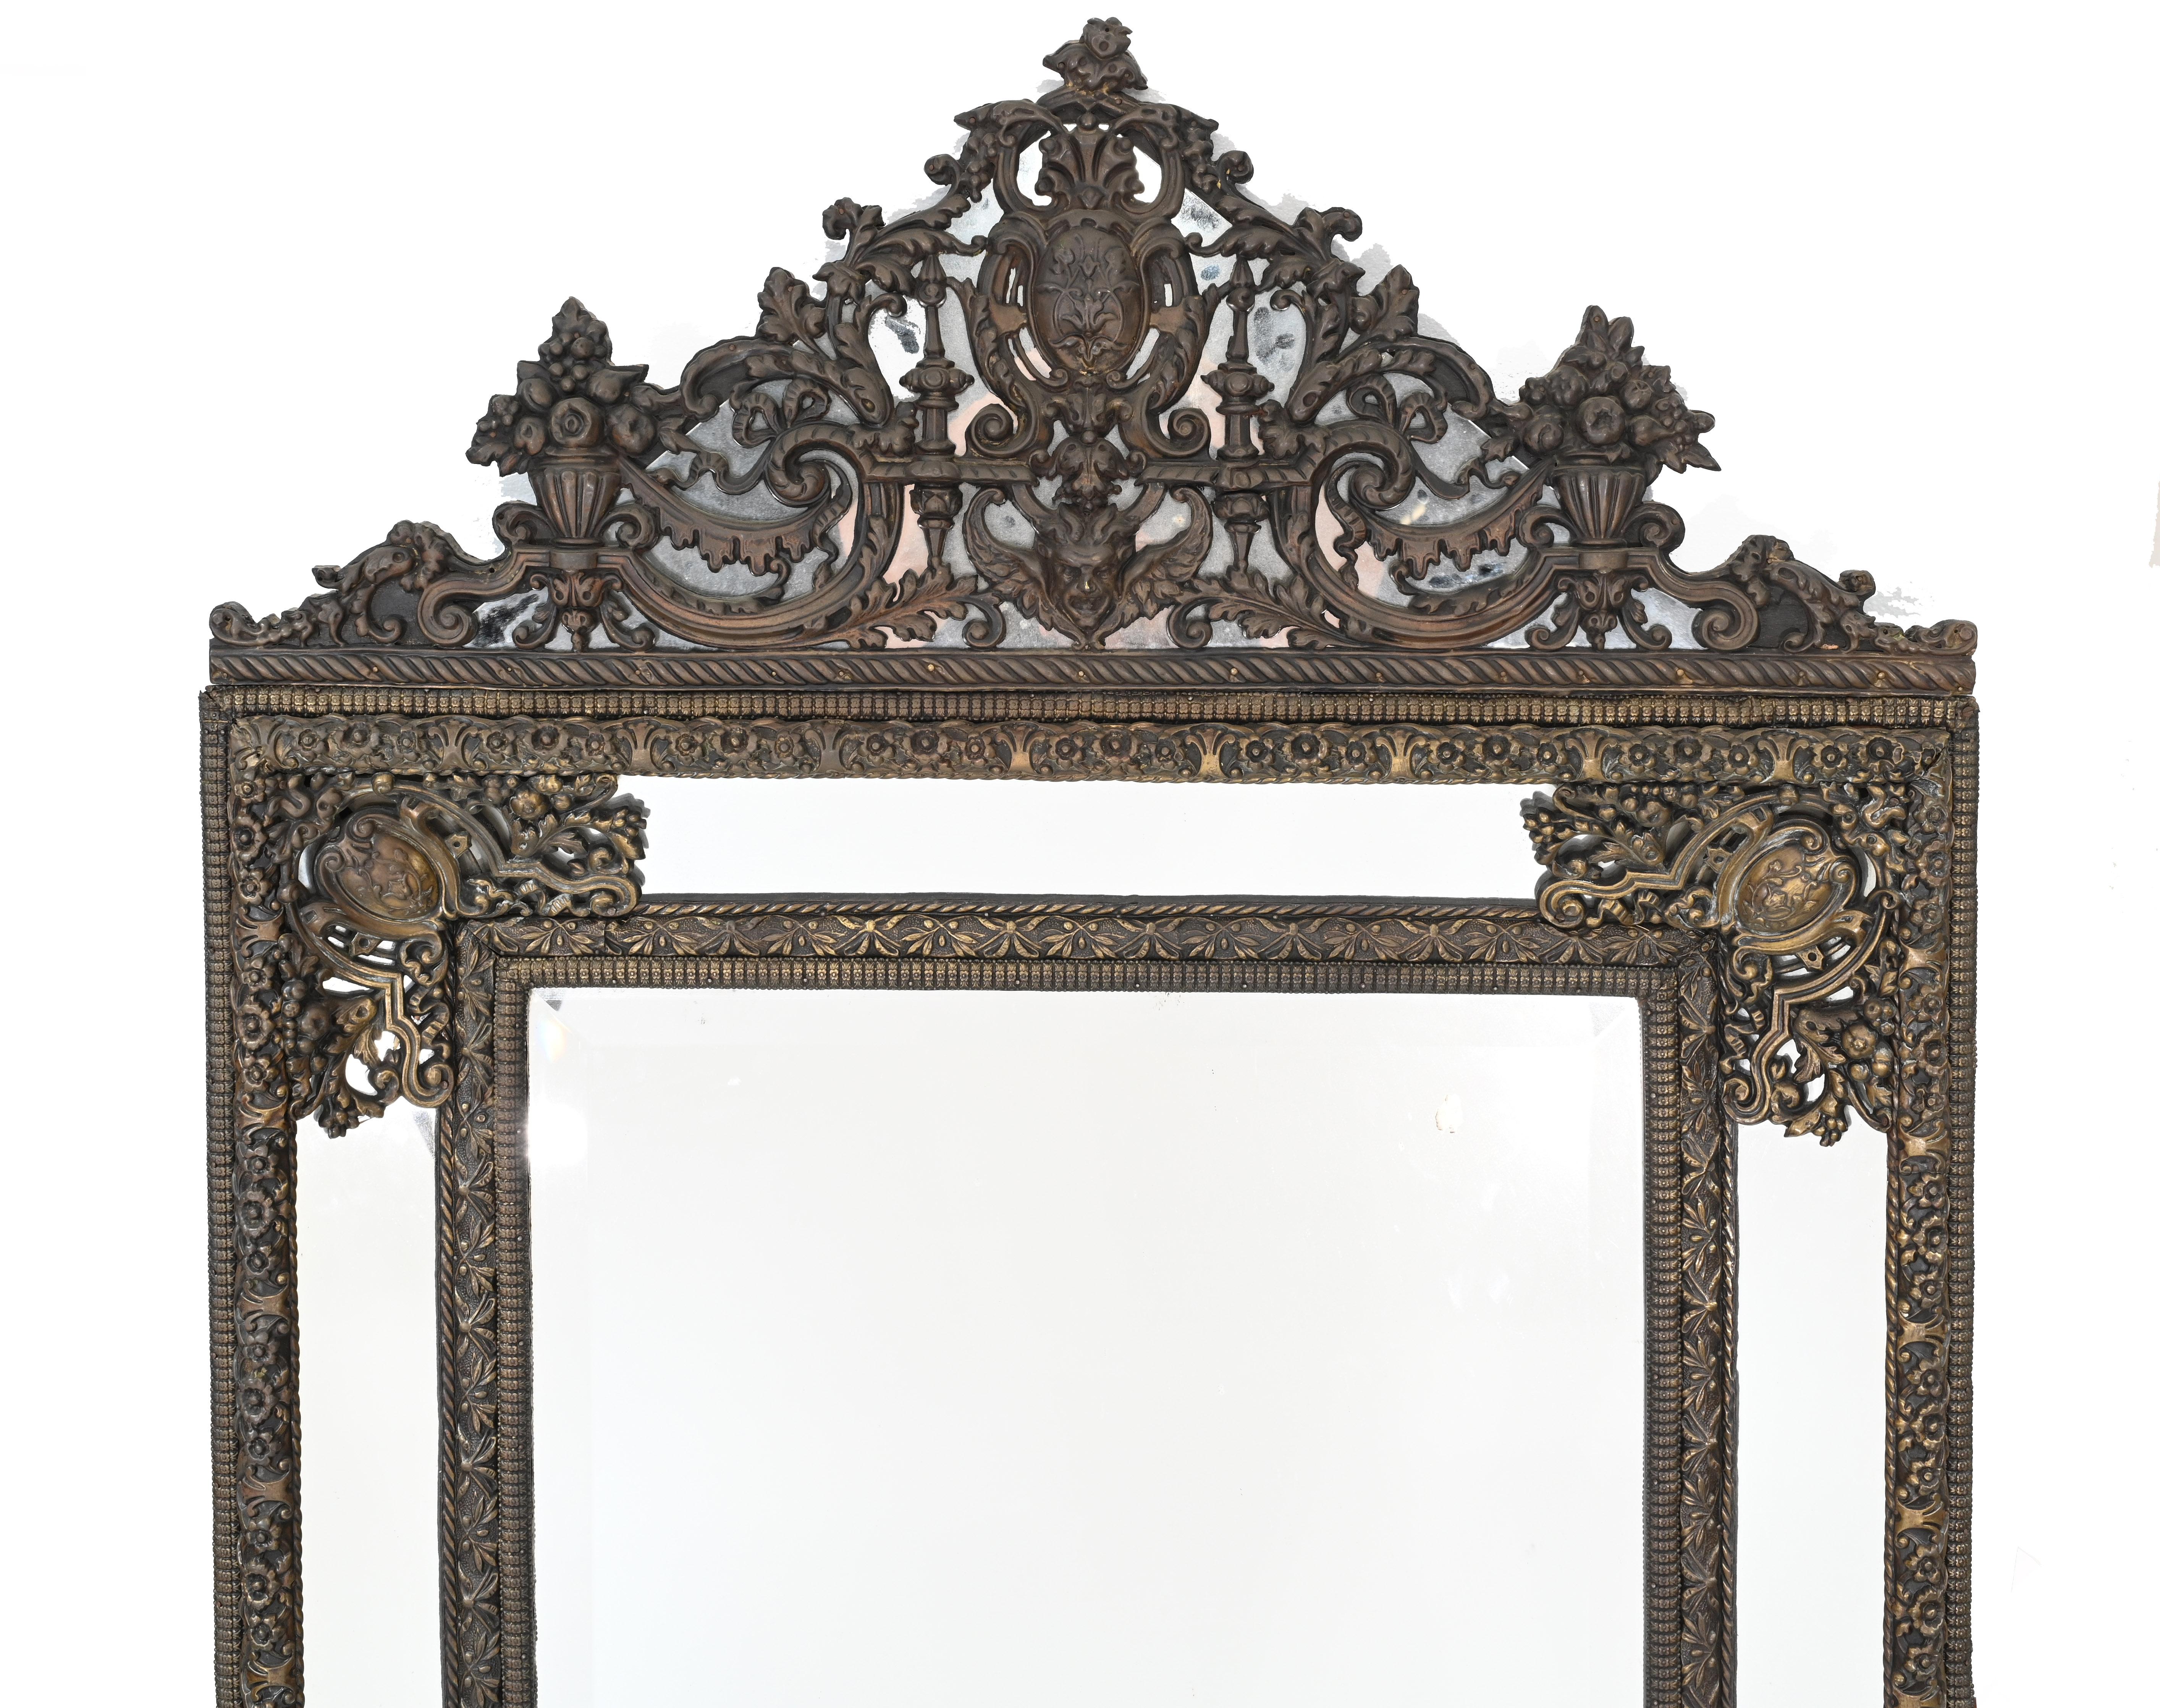 Glorious antique French cushion mirror with ormolu appliqués
We date this mirror to circa 1840
Good size at just over six feet tall - 193 CM
Bought from a dealer on Marche Biron at Paris antiques markets
Some of our items are in storage so